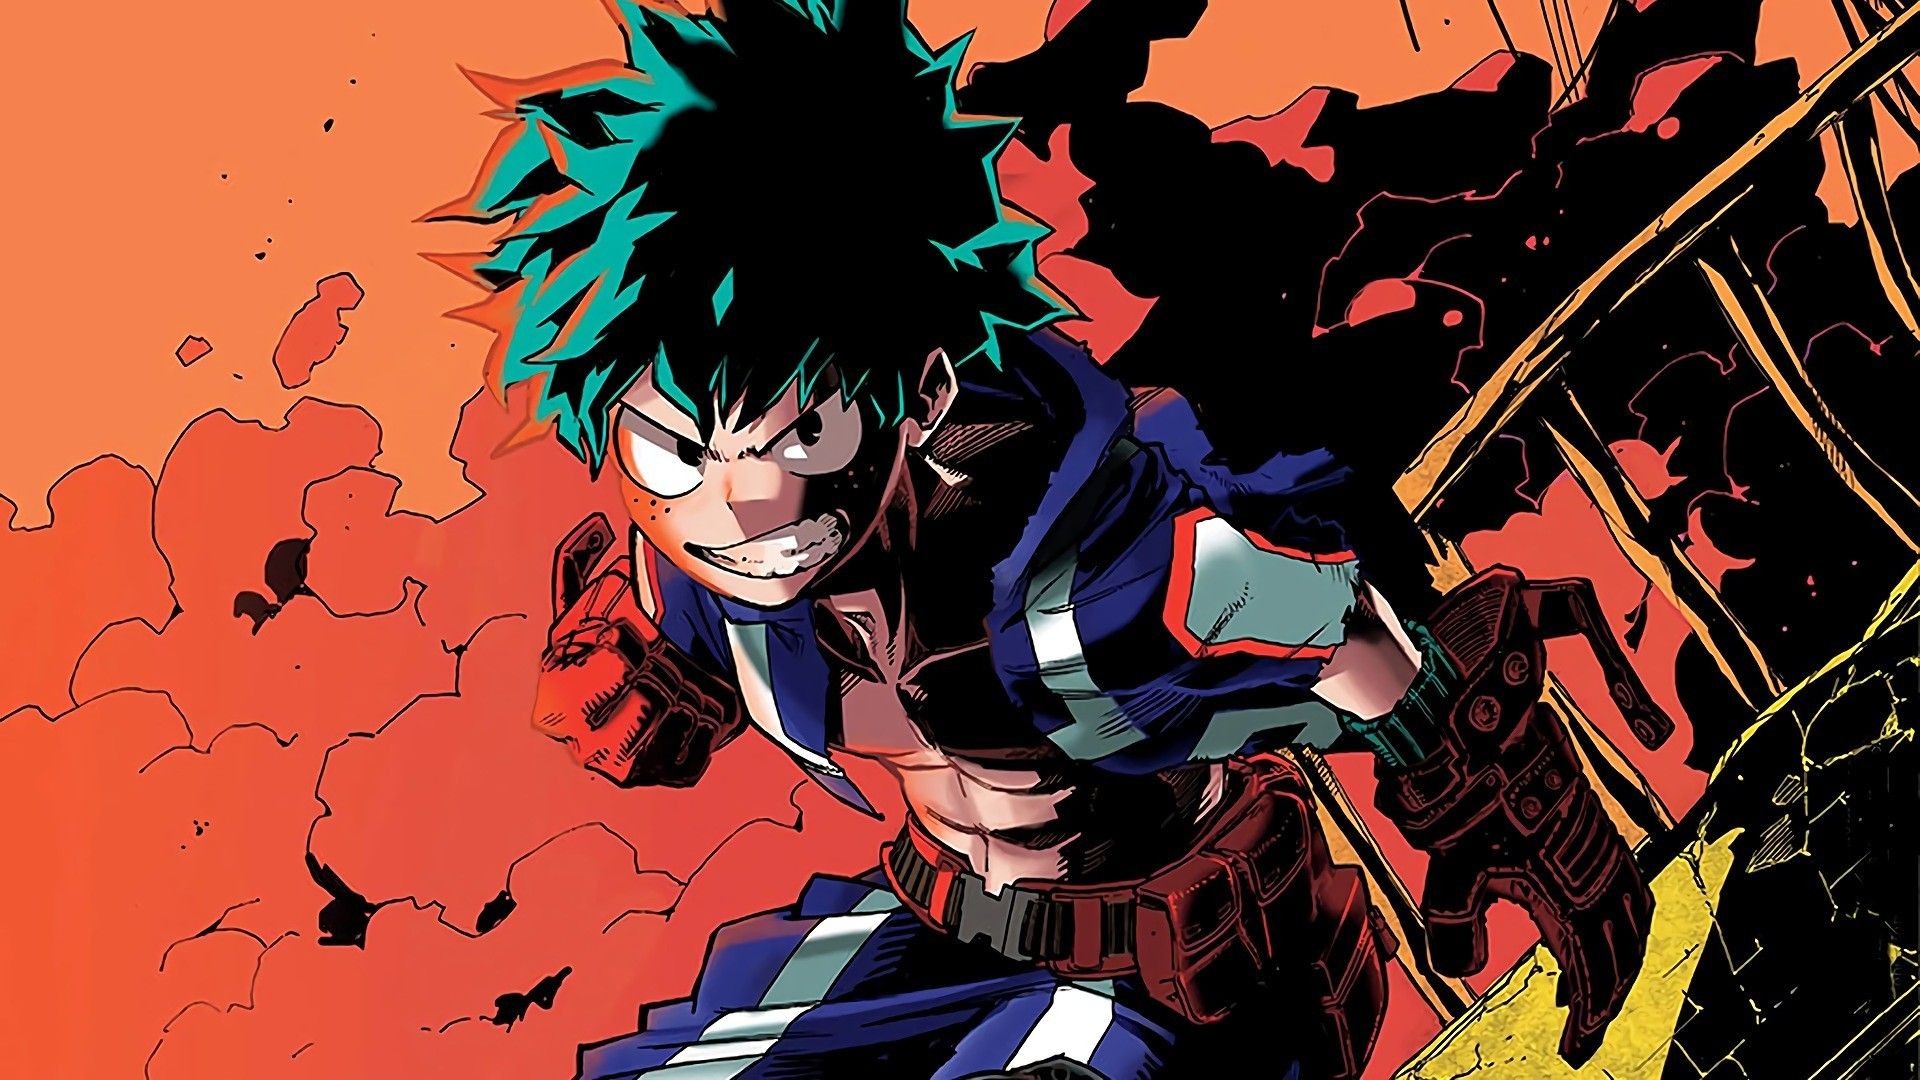 Wallpapers My Hero Academia with high-resolution 1920x1080 pixel. You can use this poster wallpaper for your Desktop Computers, Mac Screensavers, Windows Backgrounds, iPhone Wallpapers, Tablet or Android Lock screen and another Mobile device